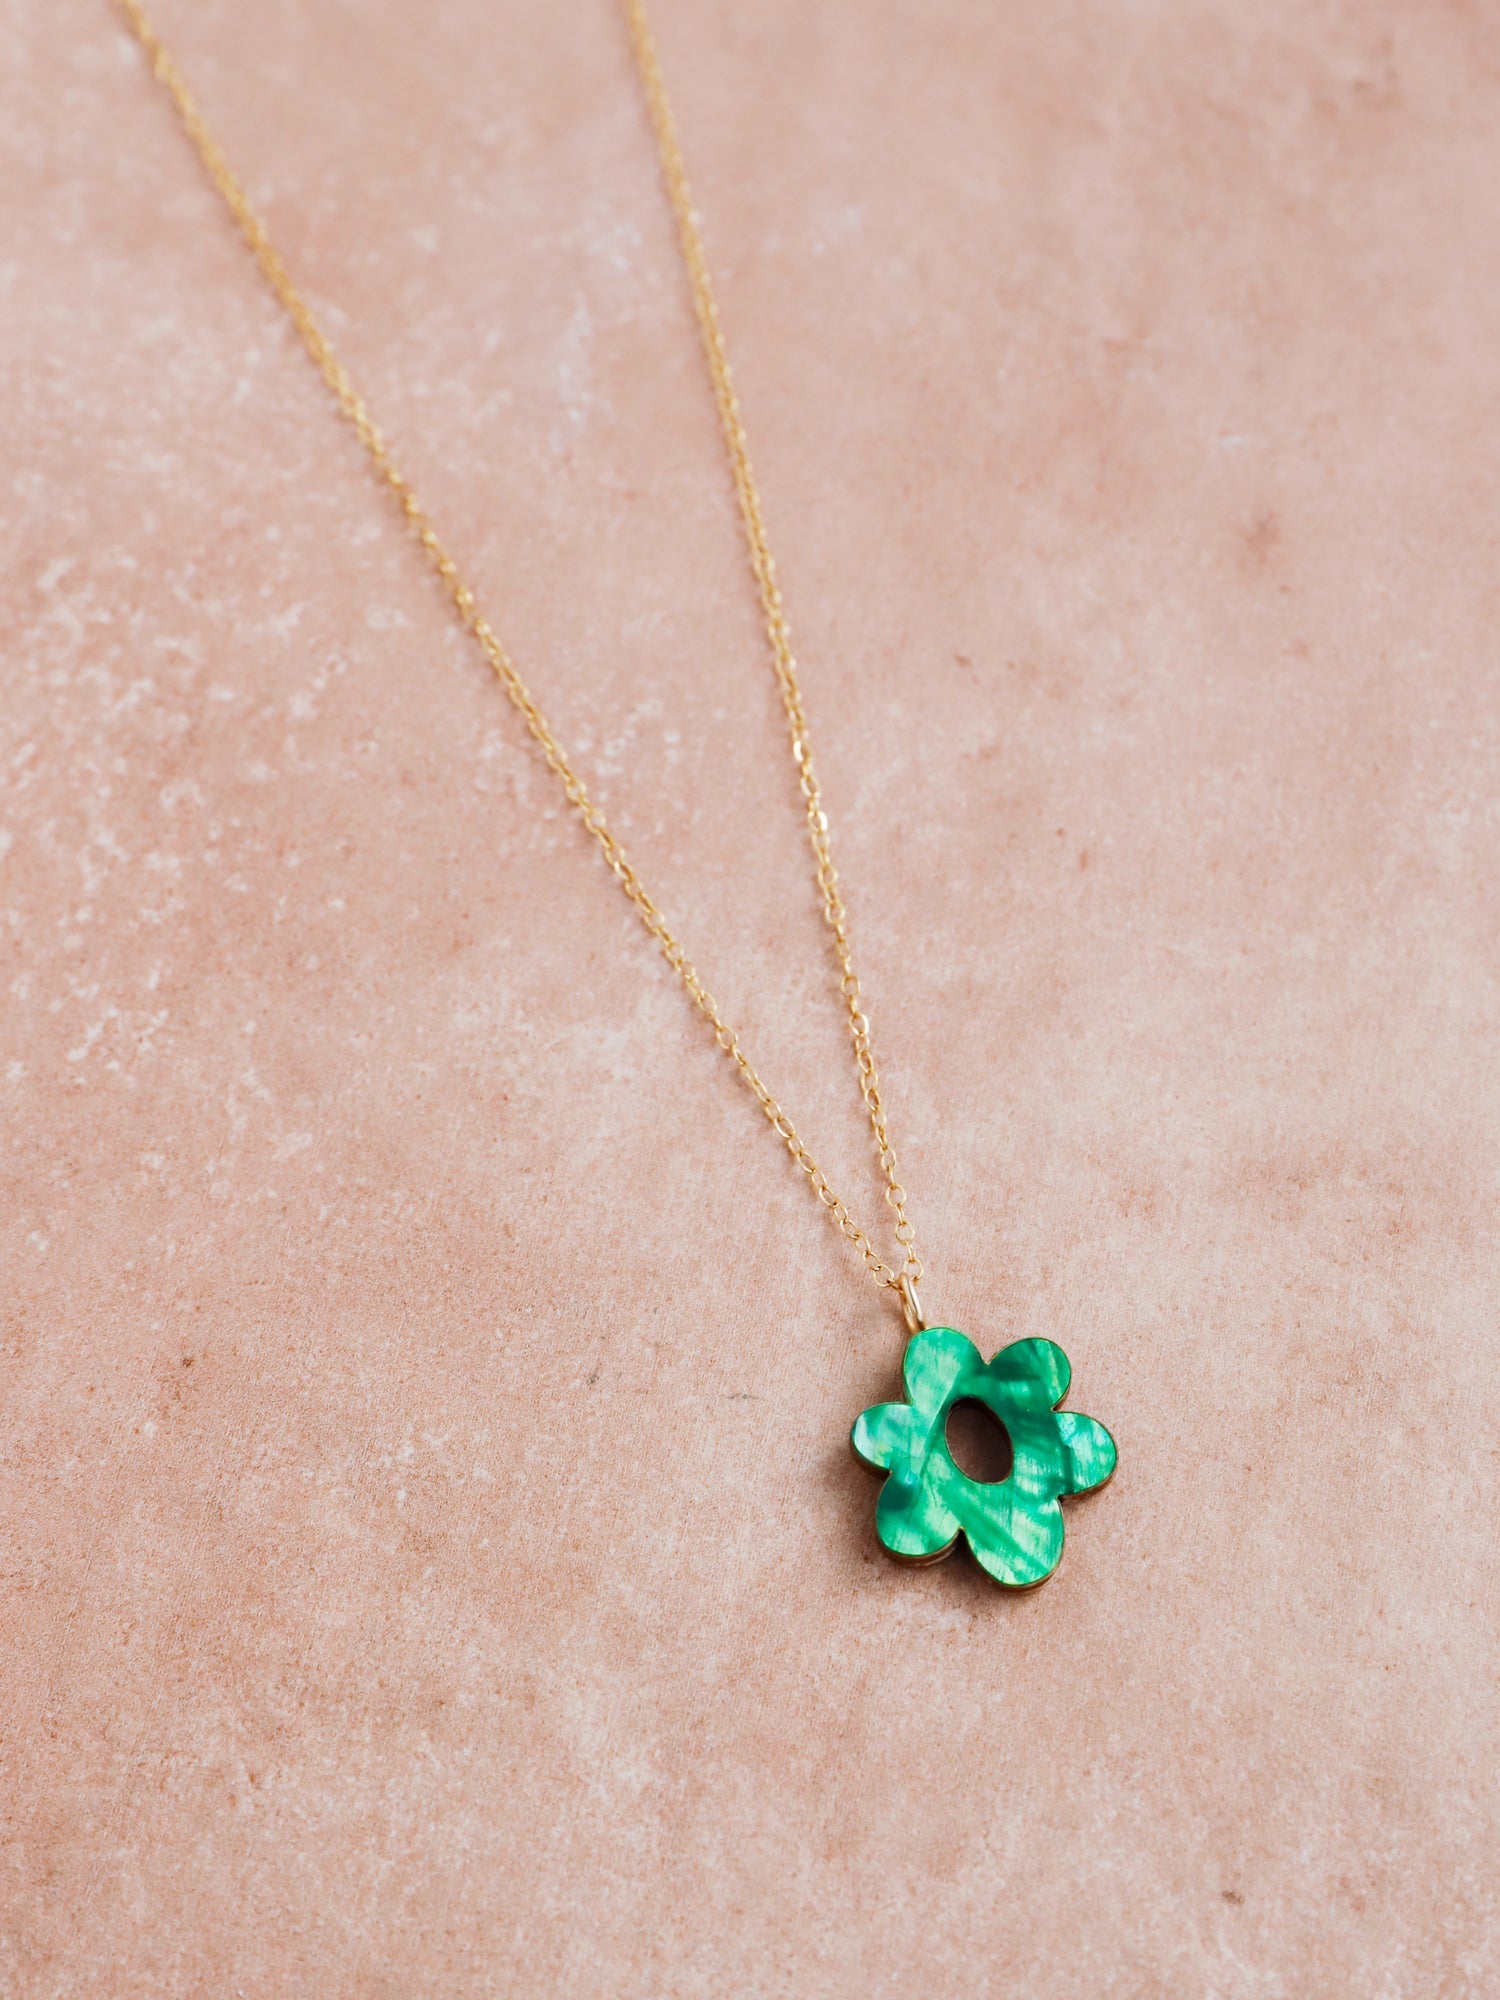 73. Mia Necklace in Emerald - No Chain/Pendant Only - Discontinued